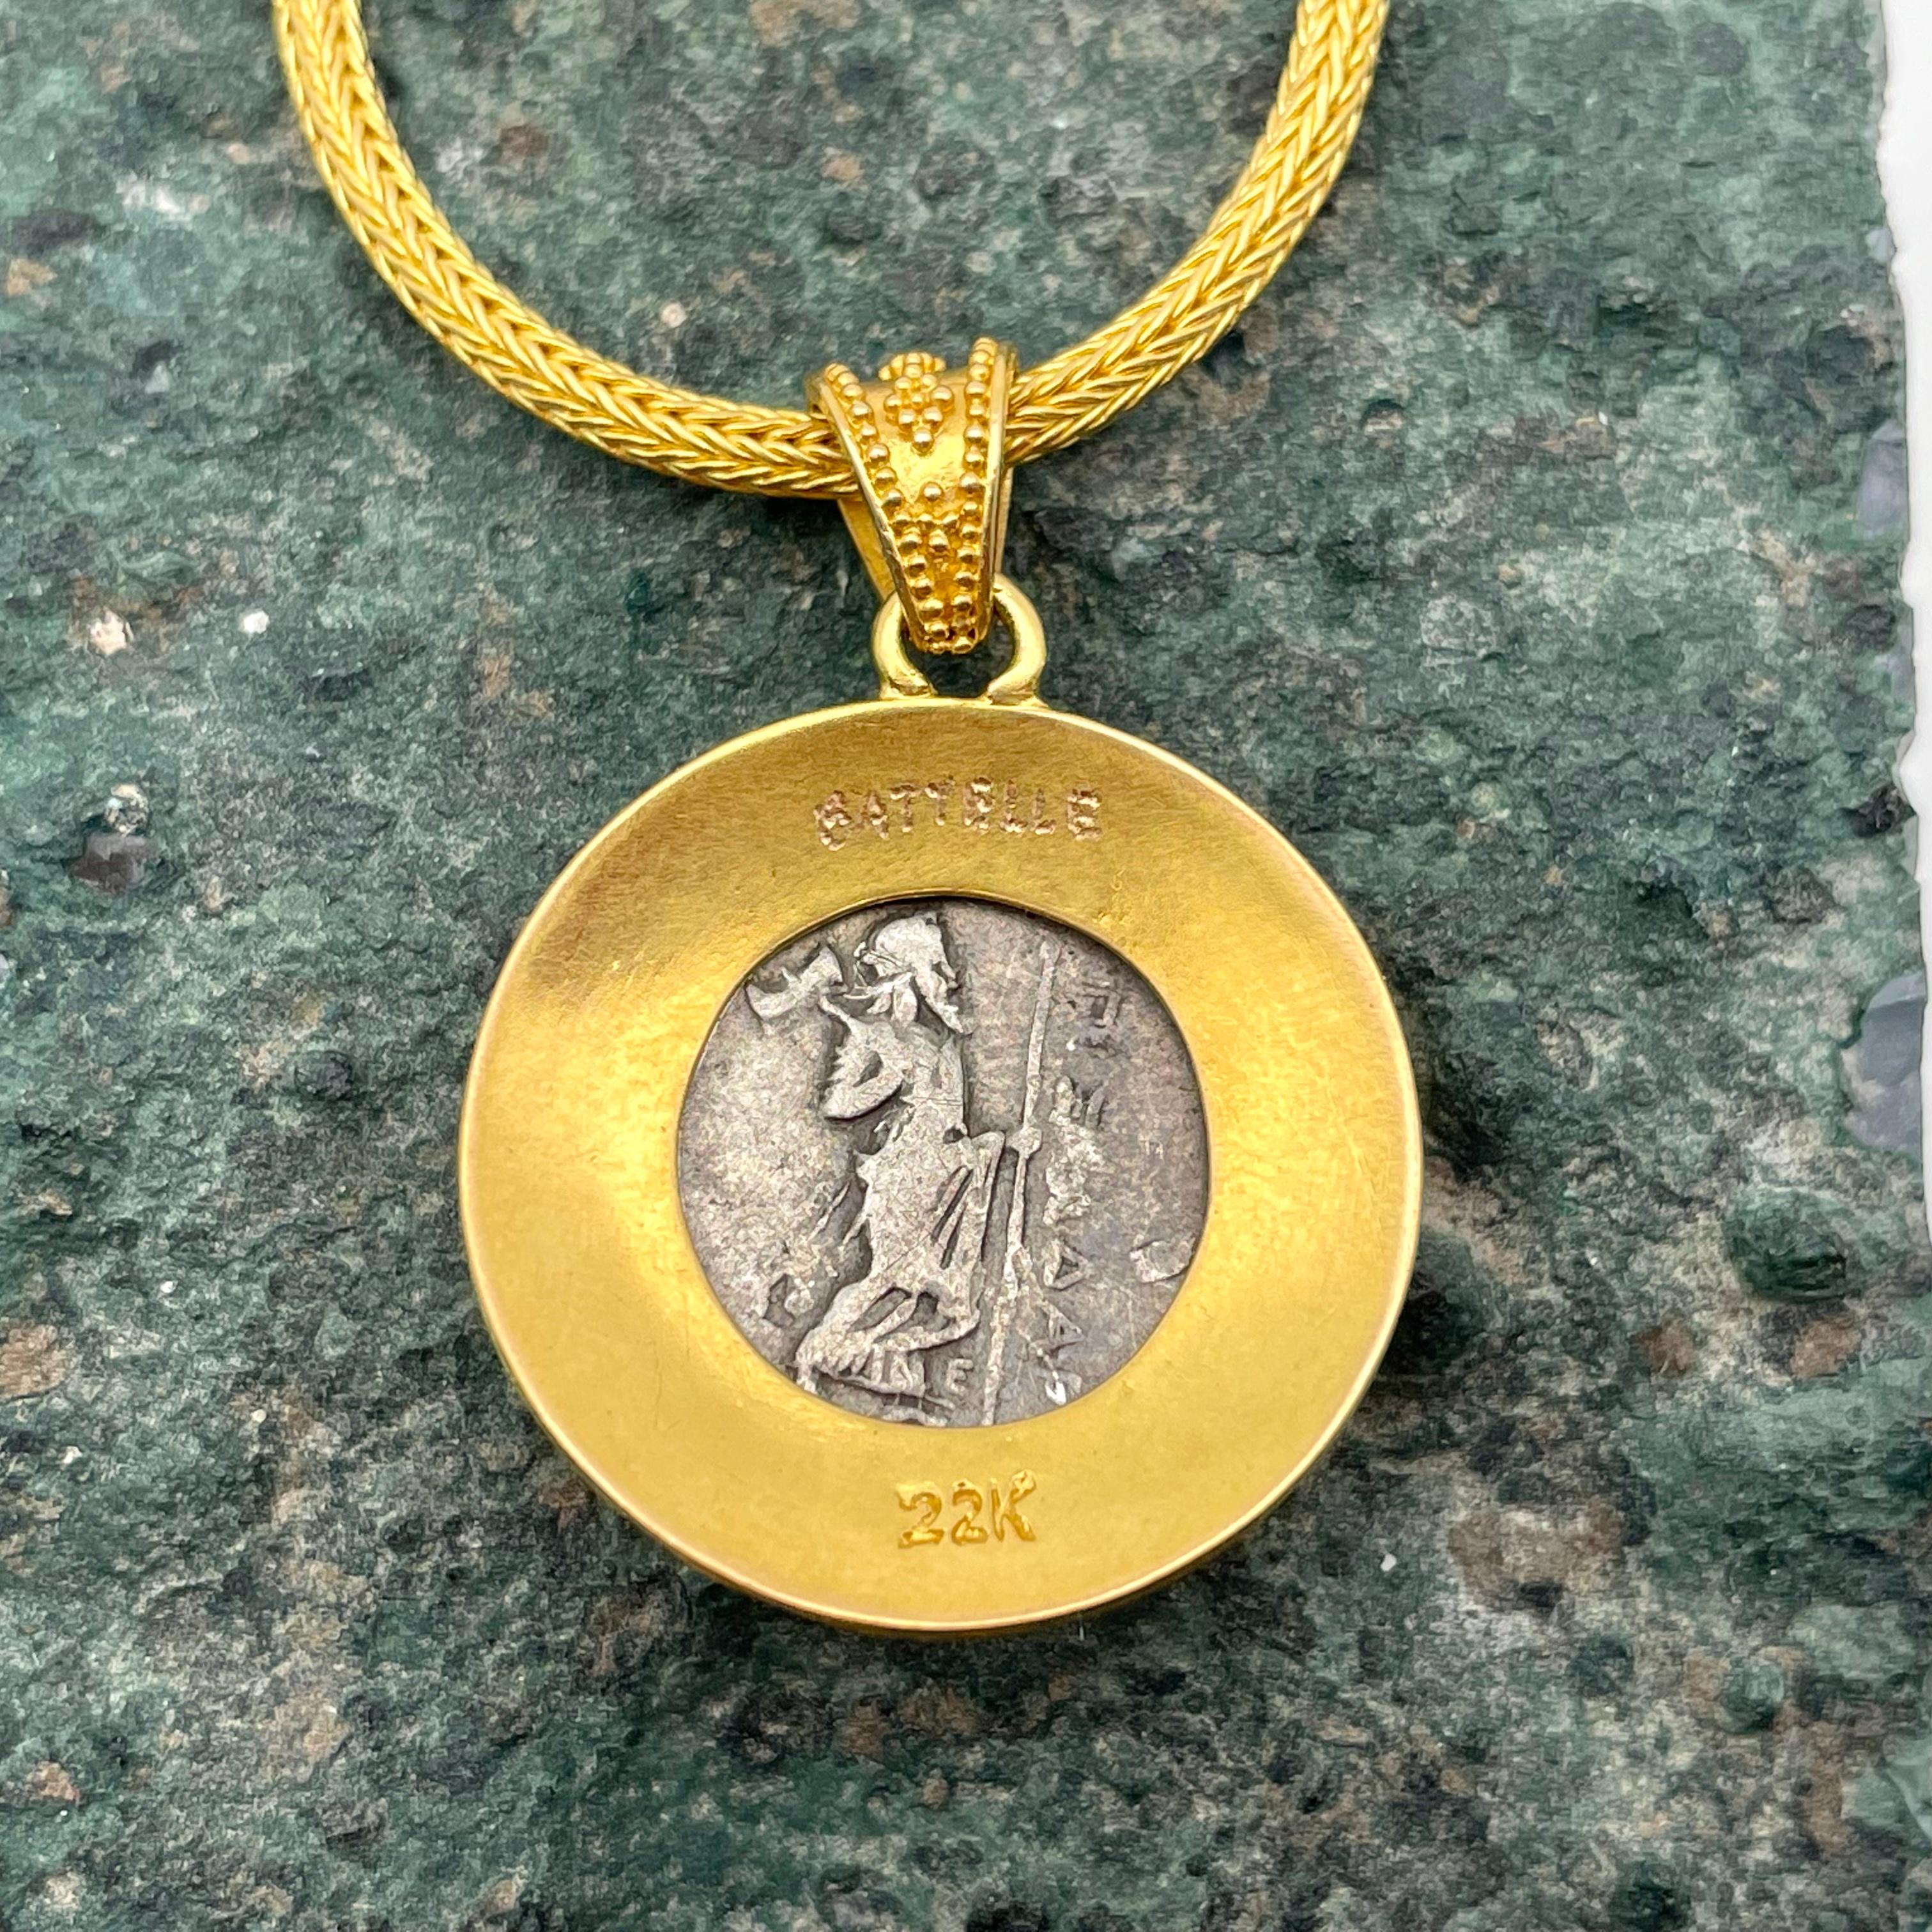 prize medal for jewellery trust in god